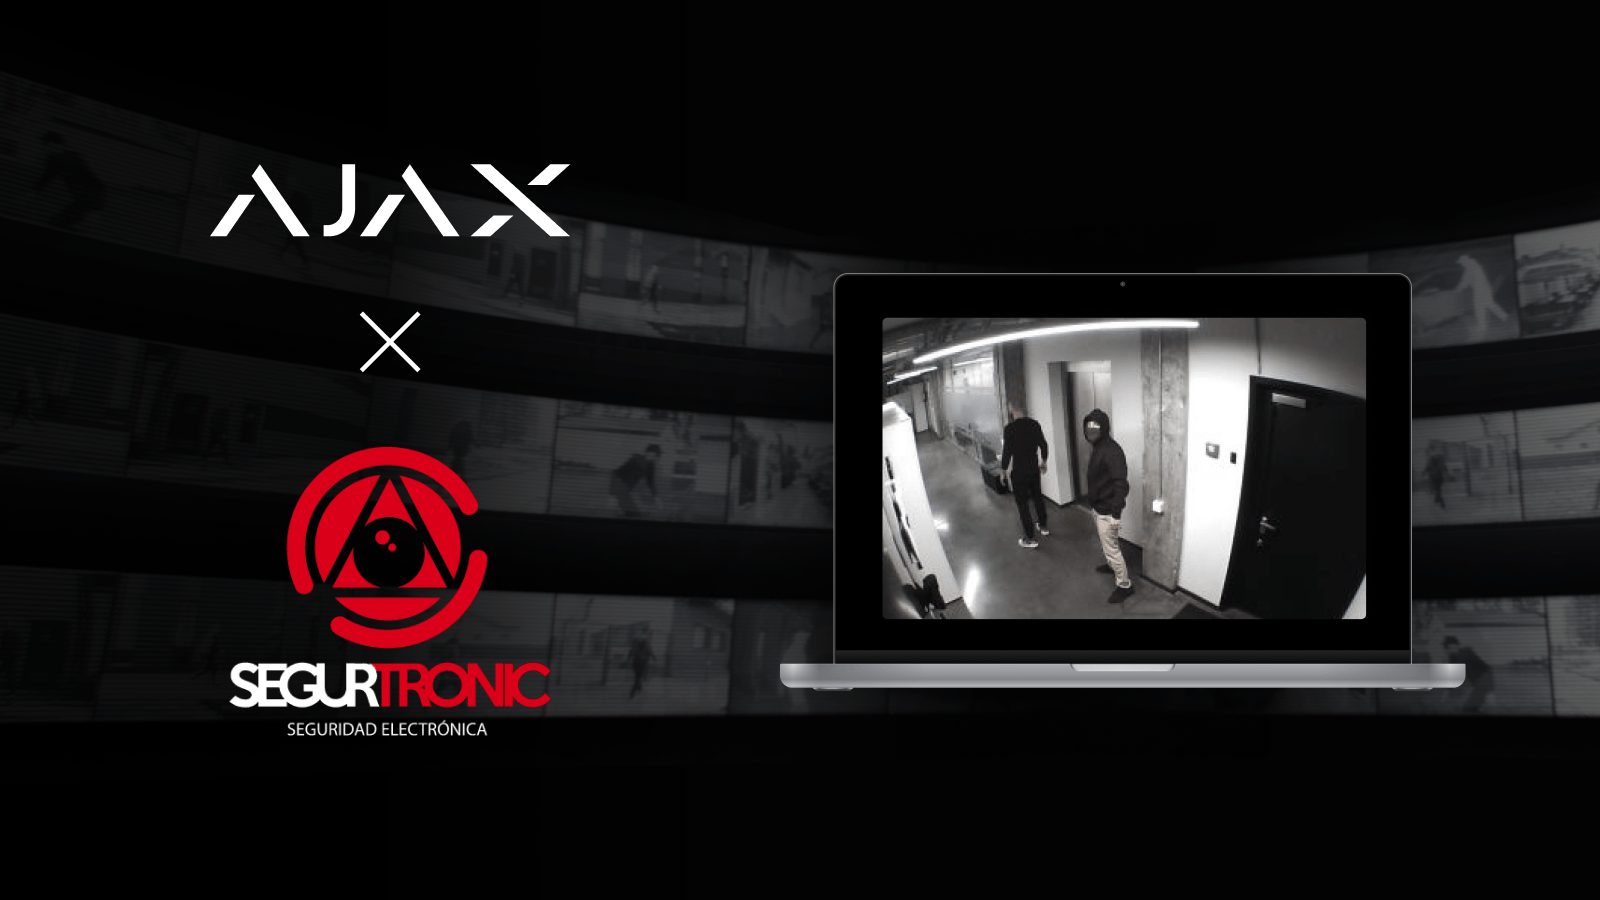 Segurtronic and Ajax Systems announce strategic partnership in security monitoring